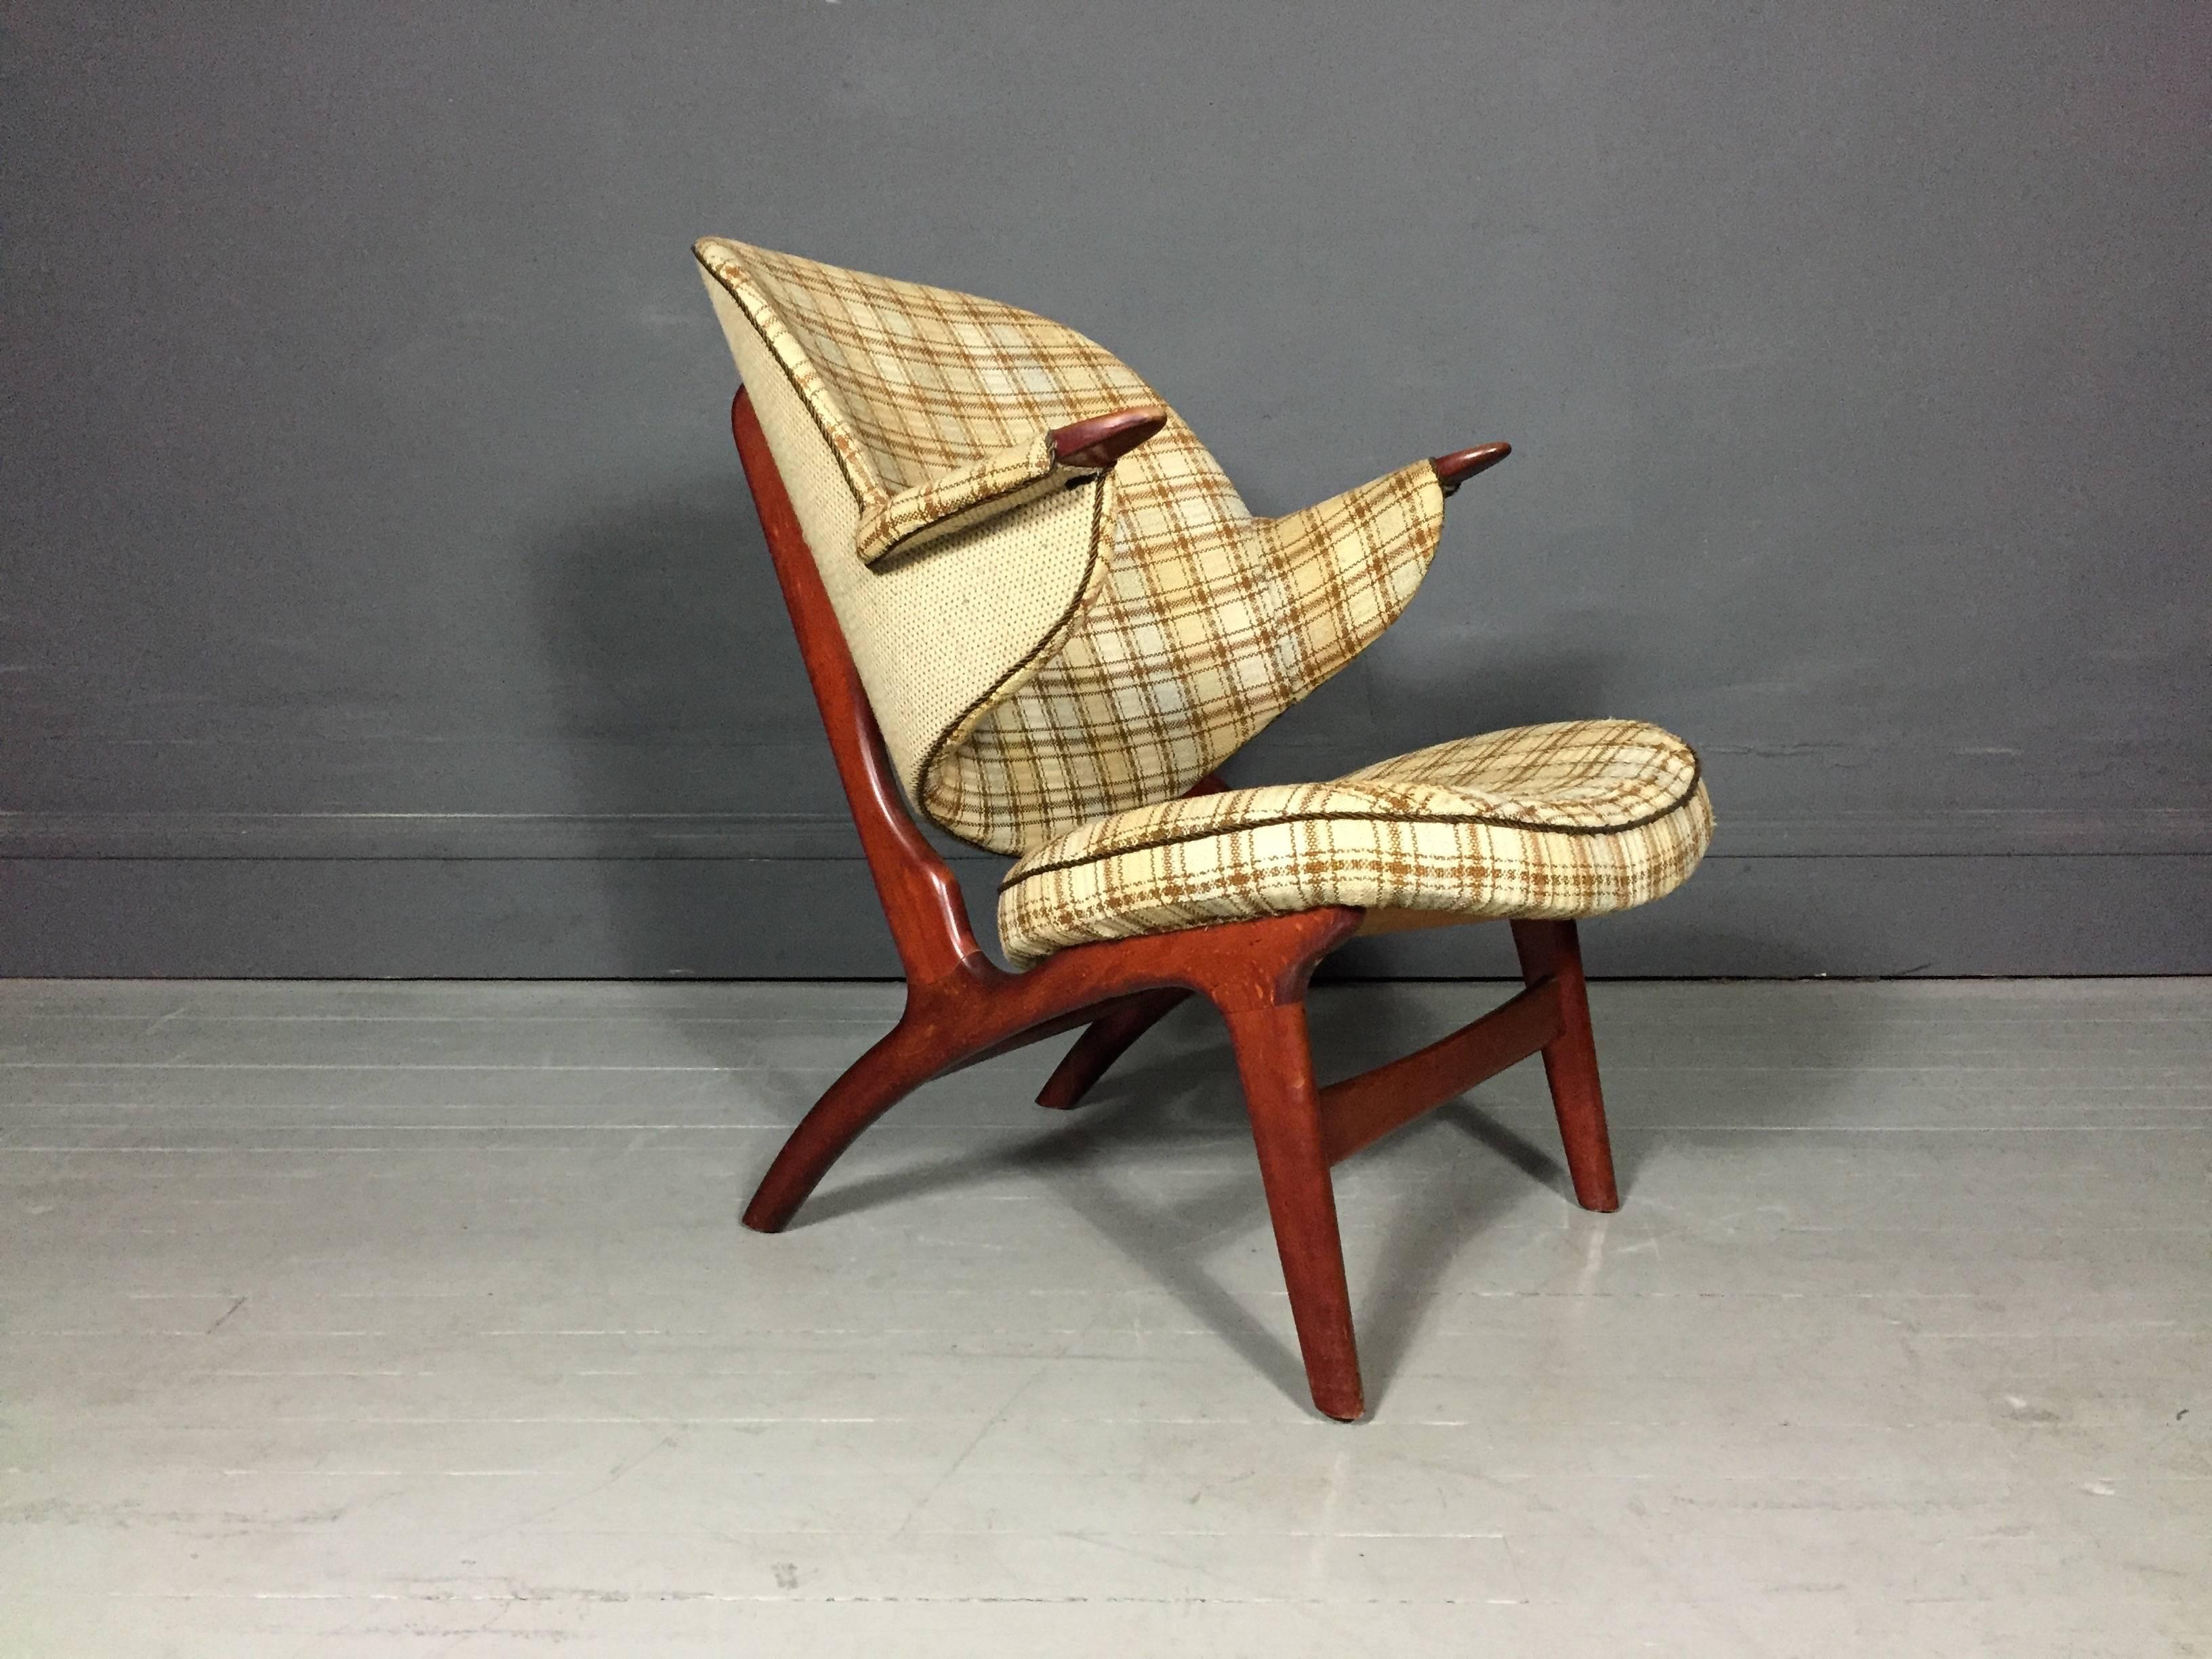 A perfect Scandinavian modern armchair with stained beech frame and vintage wool upholstery. Designed by Carl Edward Matthes in 1950s, Model 33, manufactured by Matthes polstermøbelfabrik.

Light wear to seat edge and slight coloration change at